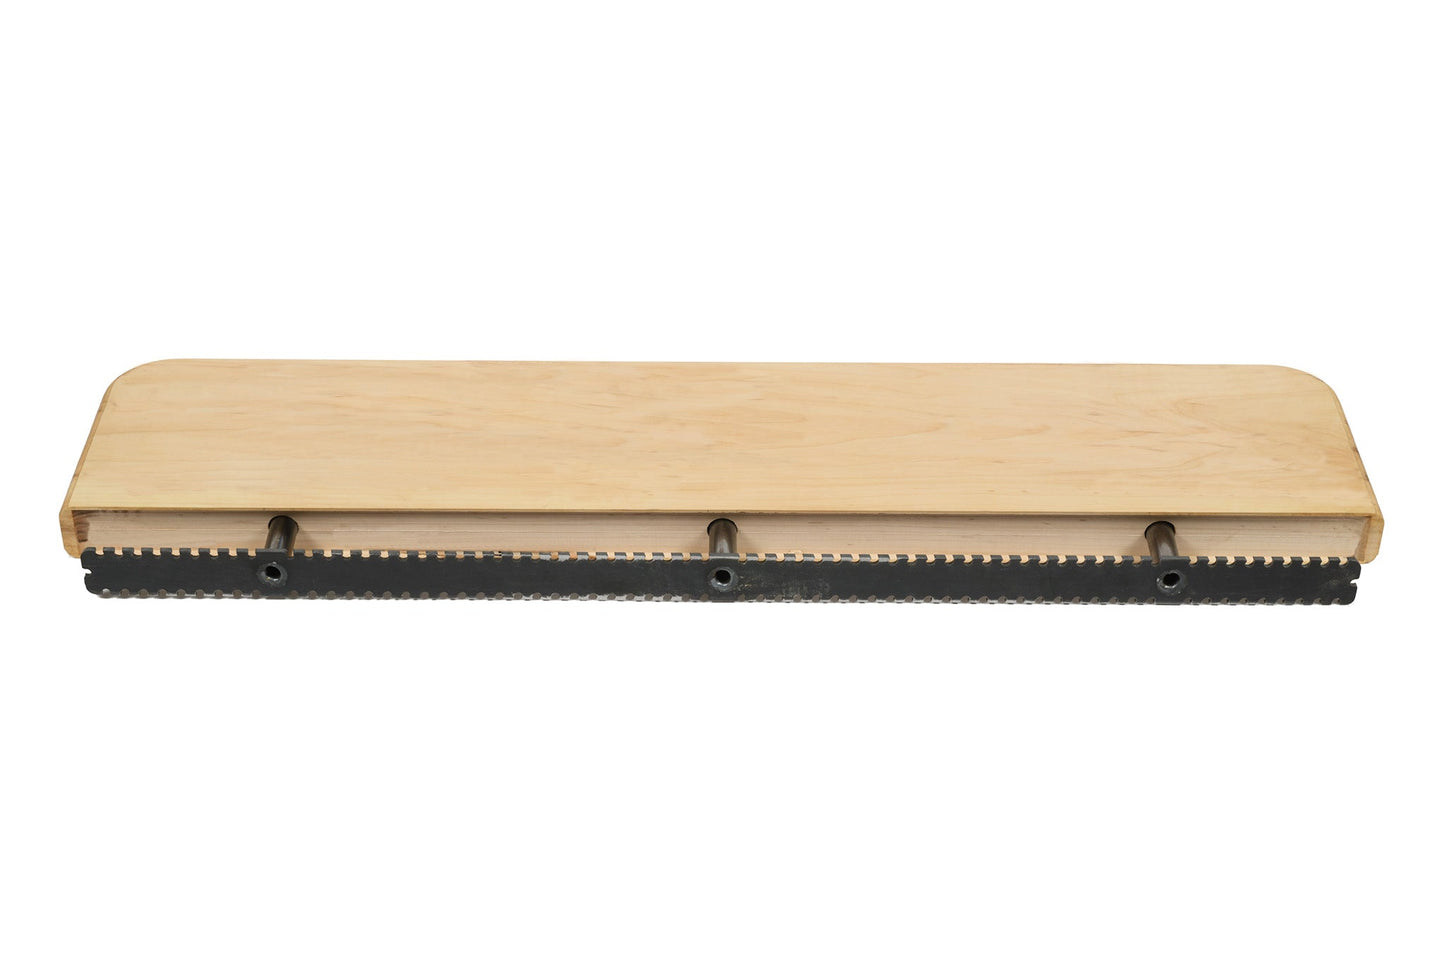 Rear view of maple floating shelf with hidden bracket partially inserted. Ridges along top and bottom are for locating support screws to line up with wall studs. Image shows rounded corners, which are available for an additional cost.